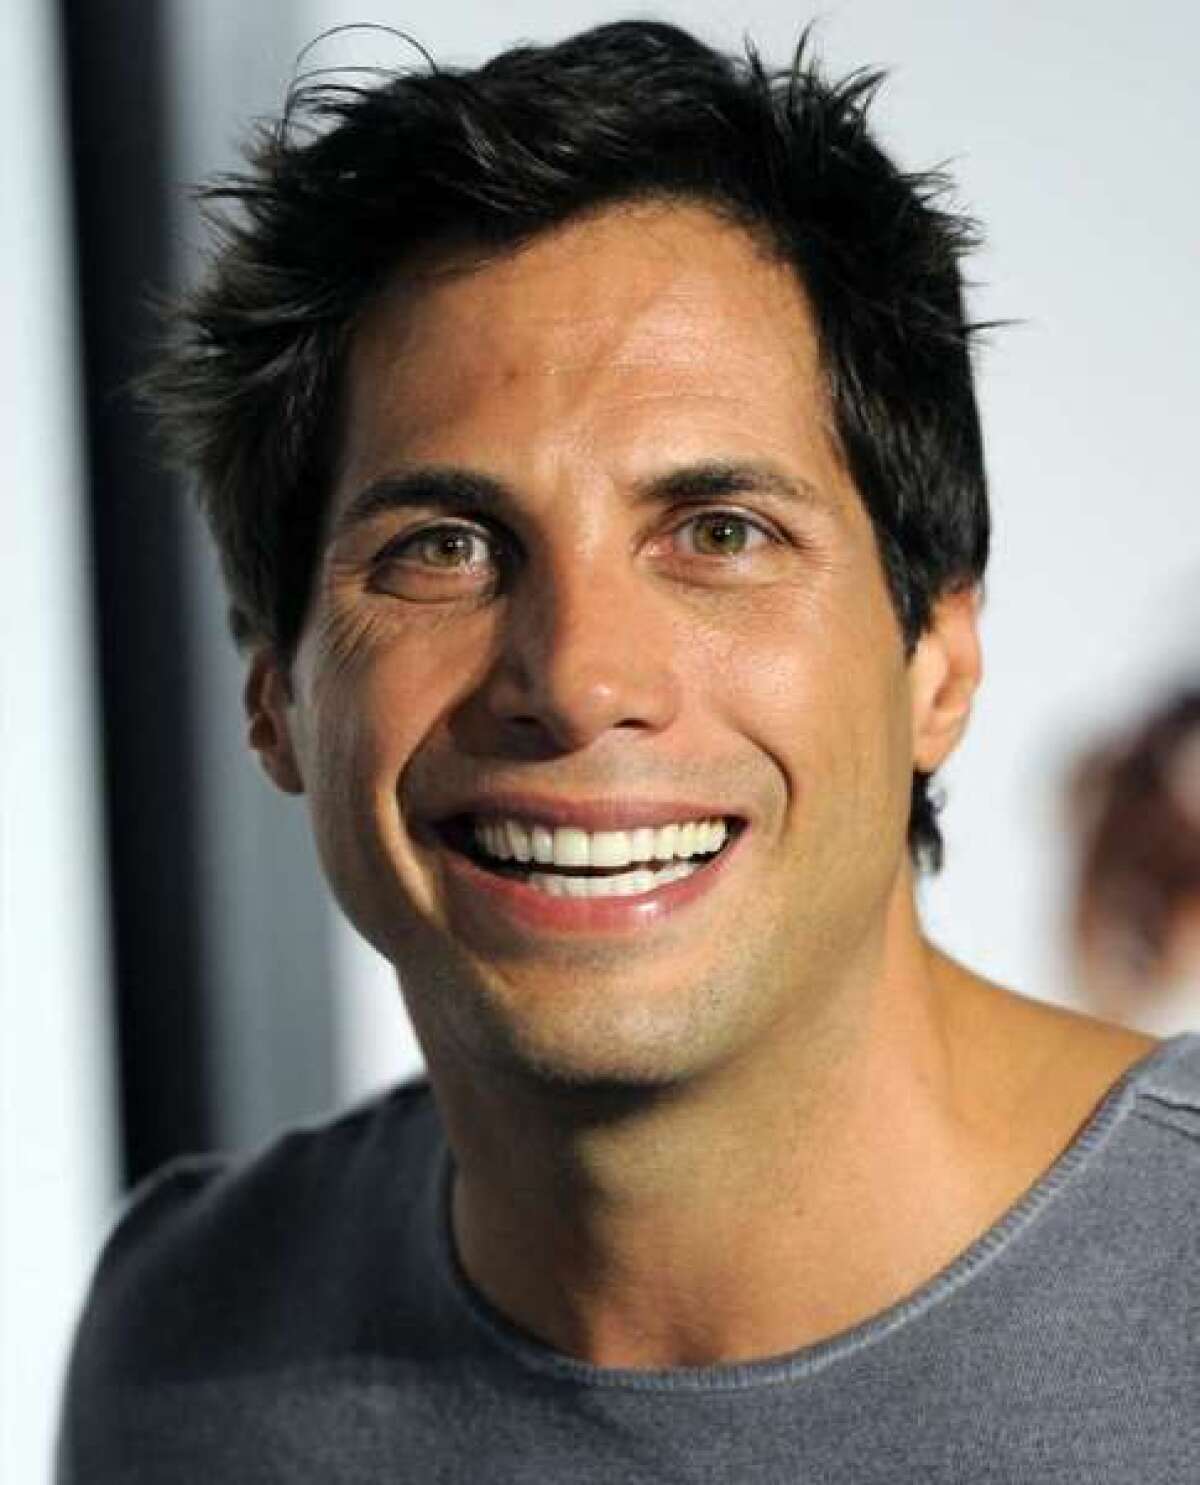 Joe Francis, creator of the "Girls Gone Wild" franchise, has said jurors in his false-imprisonment trial should be shot.